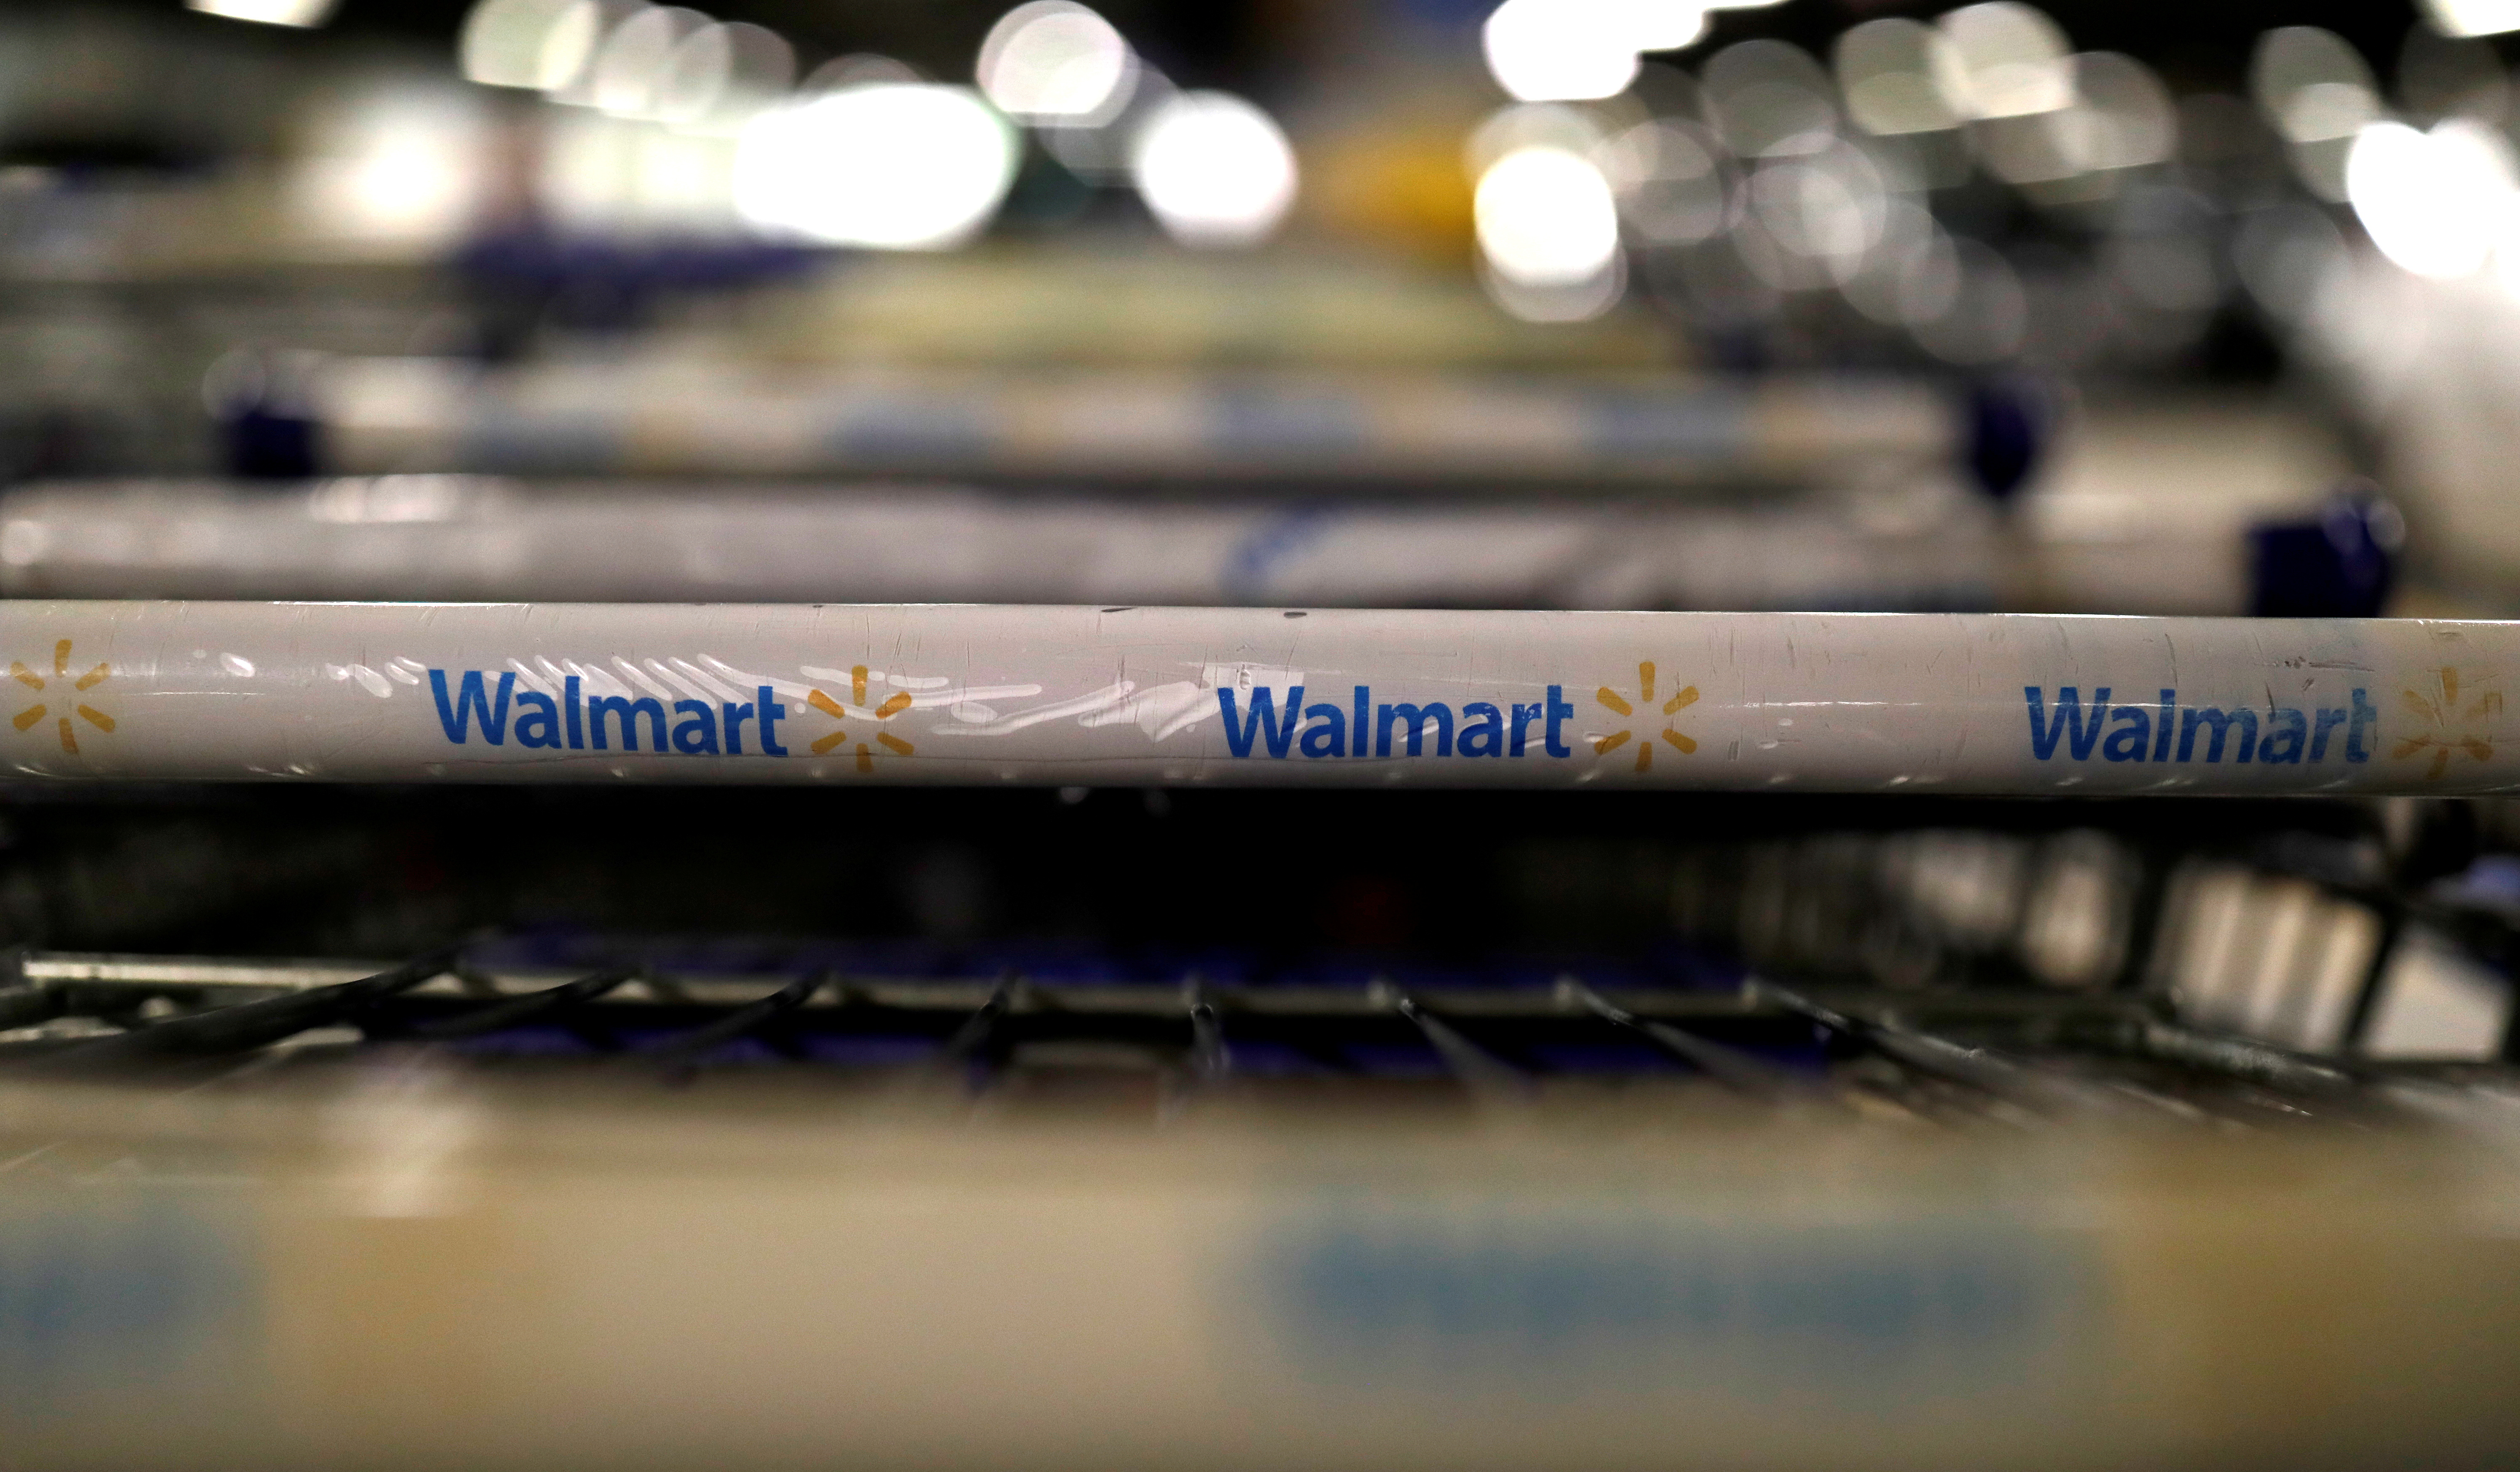 The logo of Walmart is seen on shopping trolleys at their store in Sao Paulo, Brazil February 14, 2018. REUTERS/Paulo Whitaker